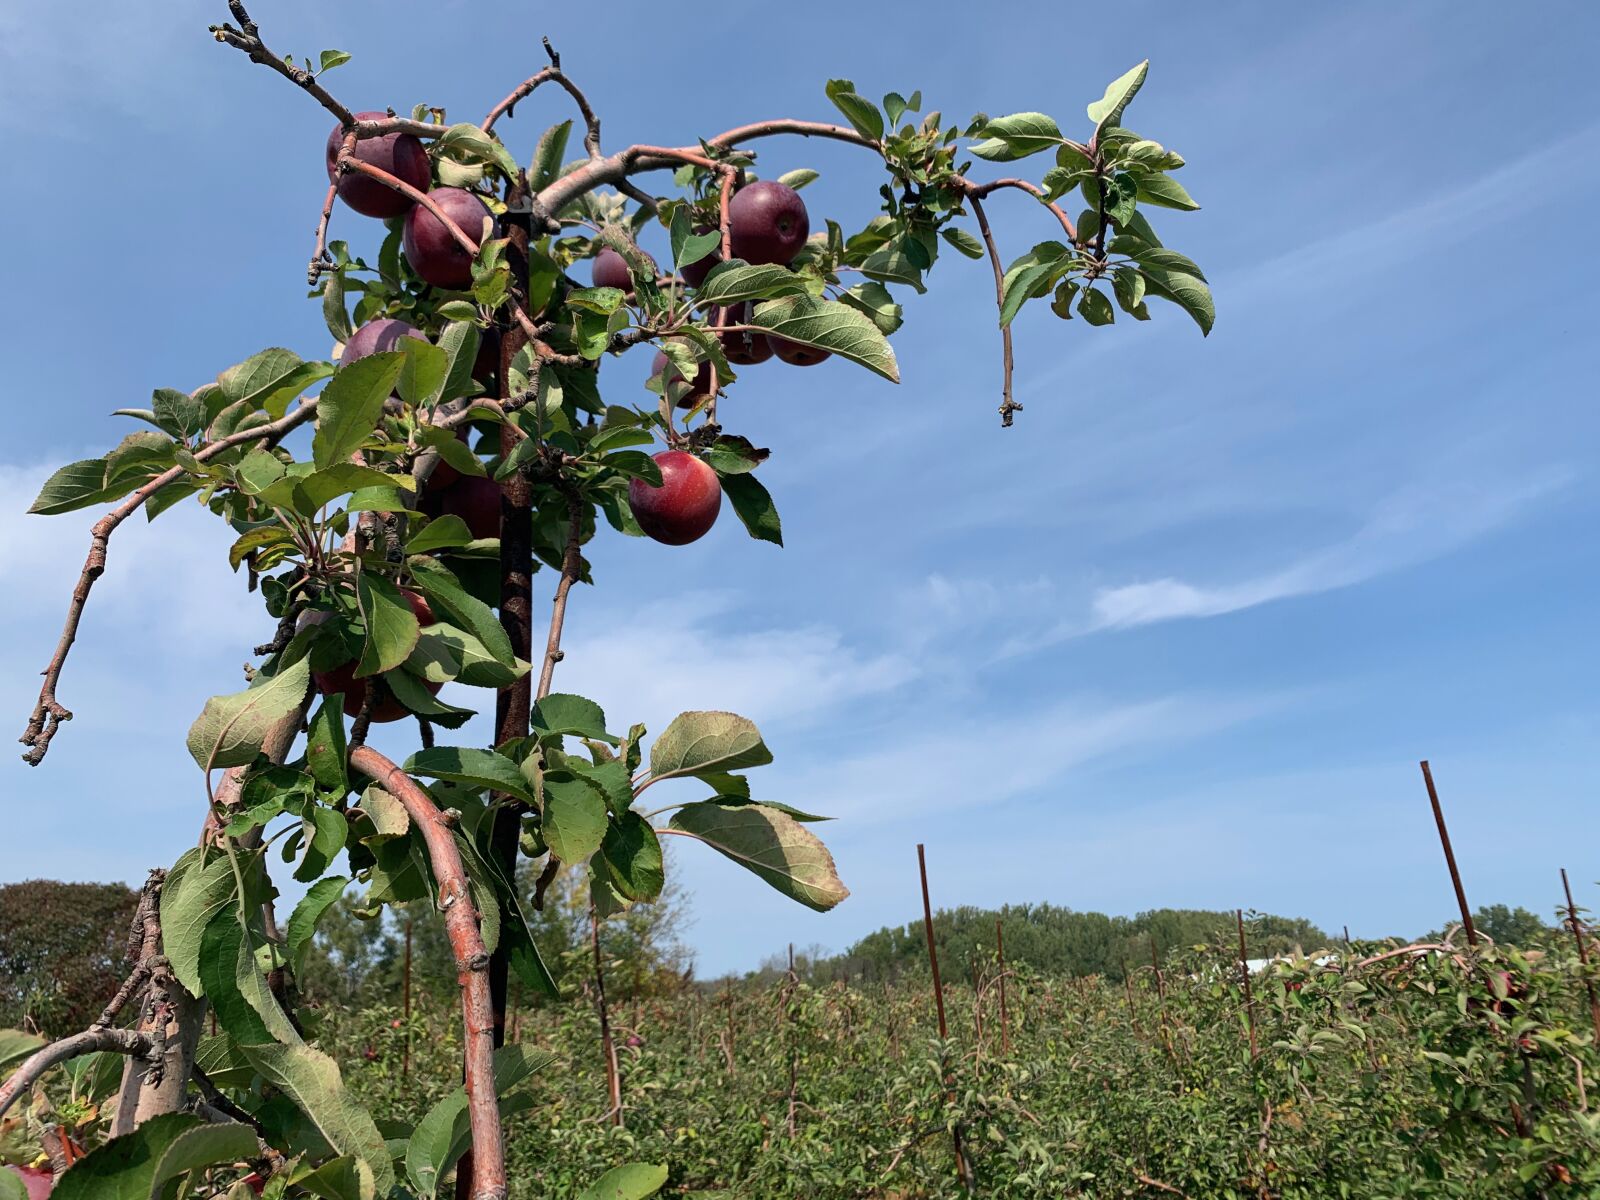 Apple iPhone XS Max + iPhone XS Max back dual camera 4.25mm f/1.8 sample photo. Apples, fall, sky photography